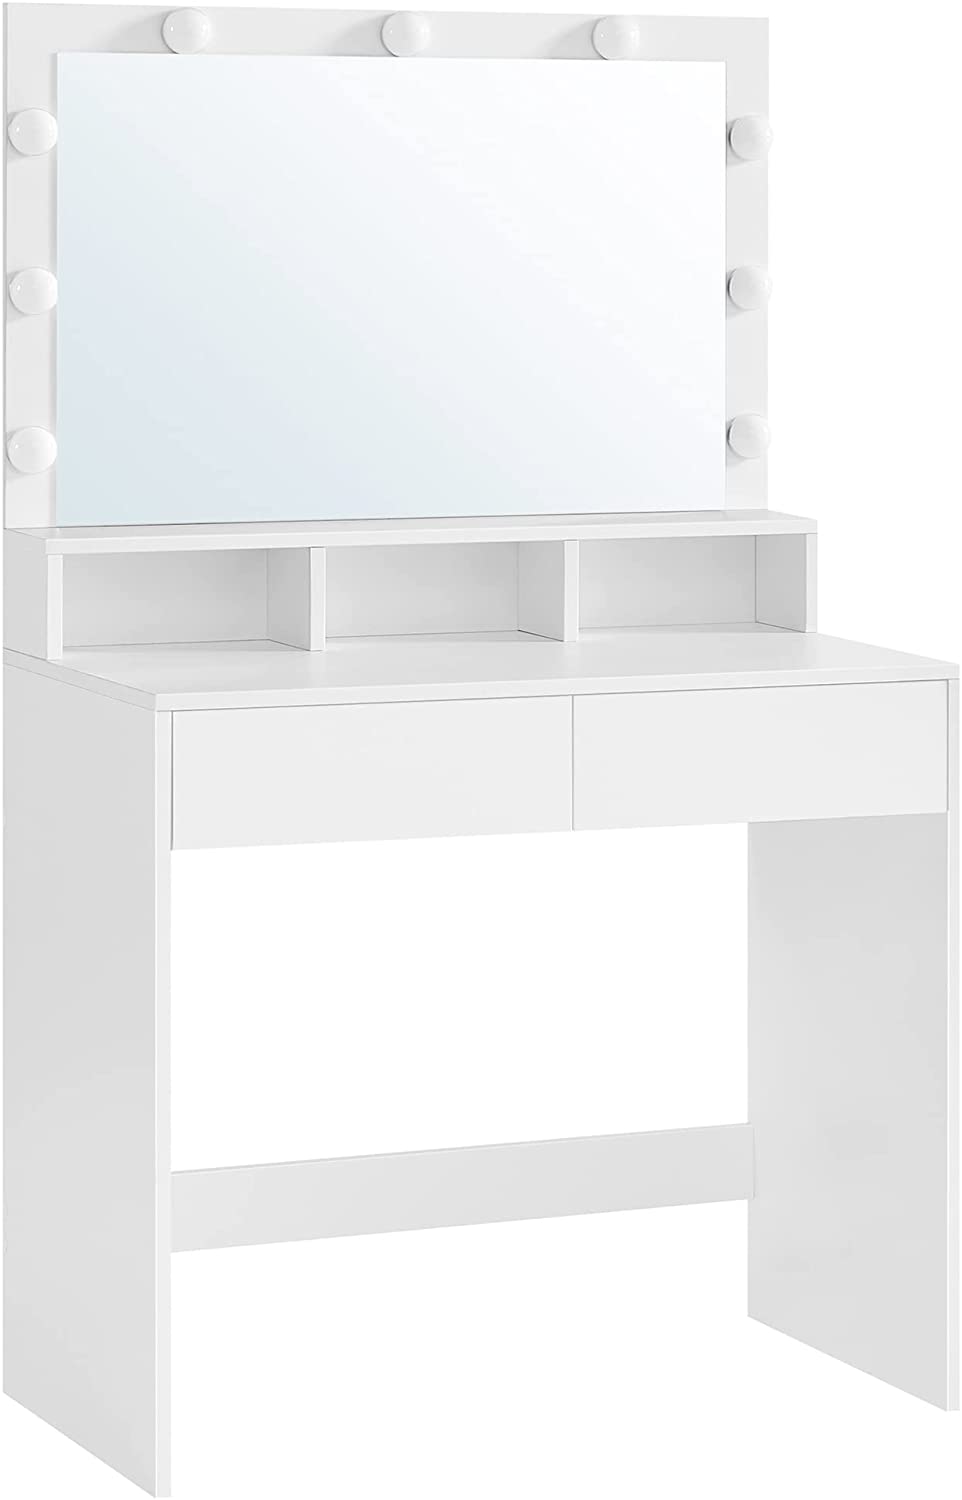 Nancy's Bungays Brook Dressing table with LED lamps - Make-up table - Modern - White - 80 x 40 x 140 cm